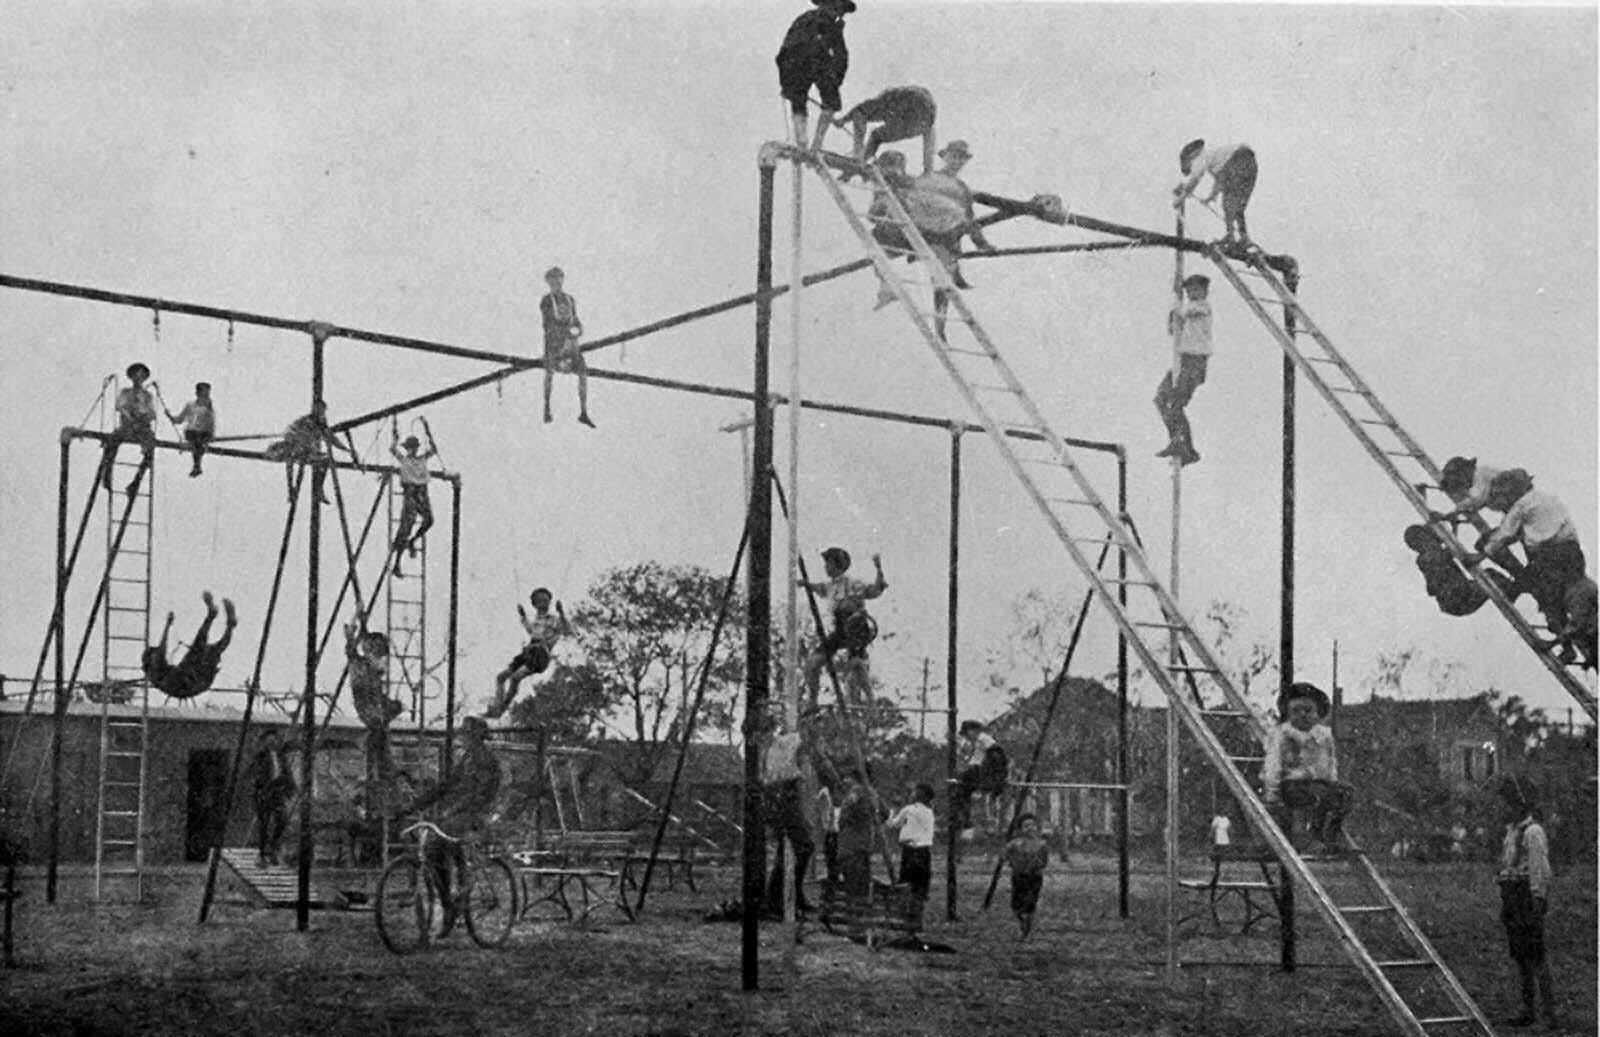  Playgrounds used to encourage challenge and risk and look incredibly dangerous to our modern eyes. 